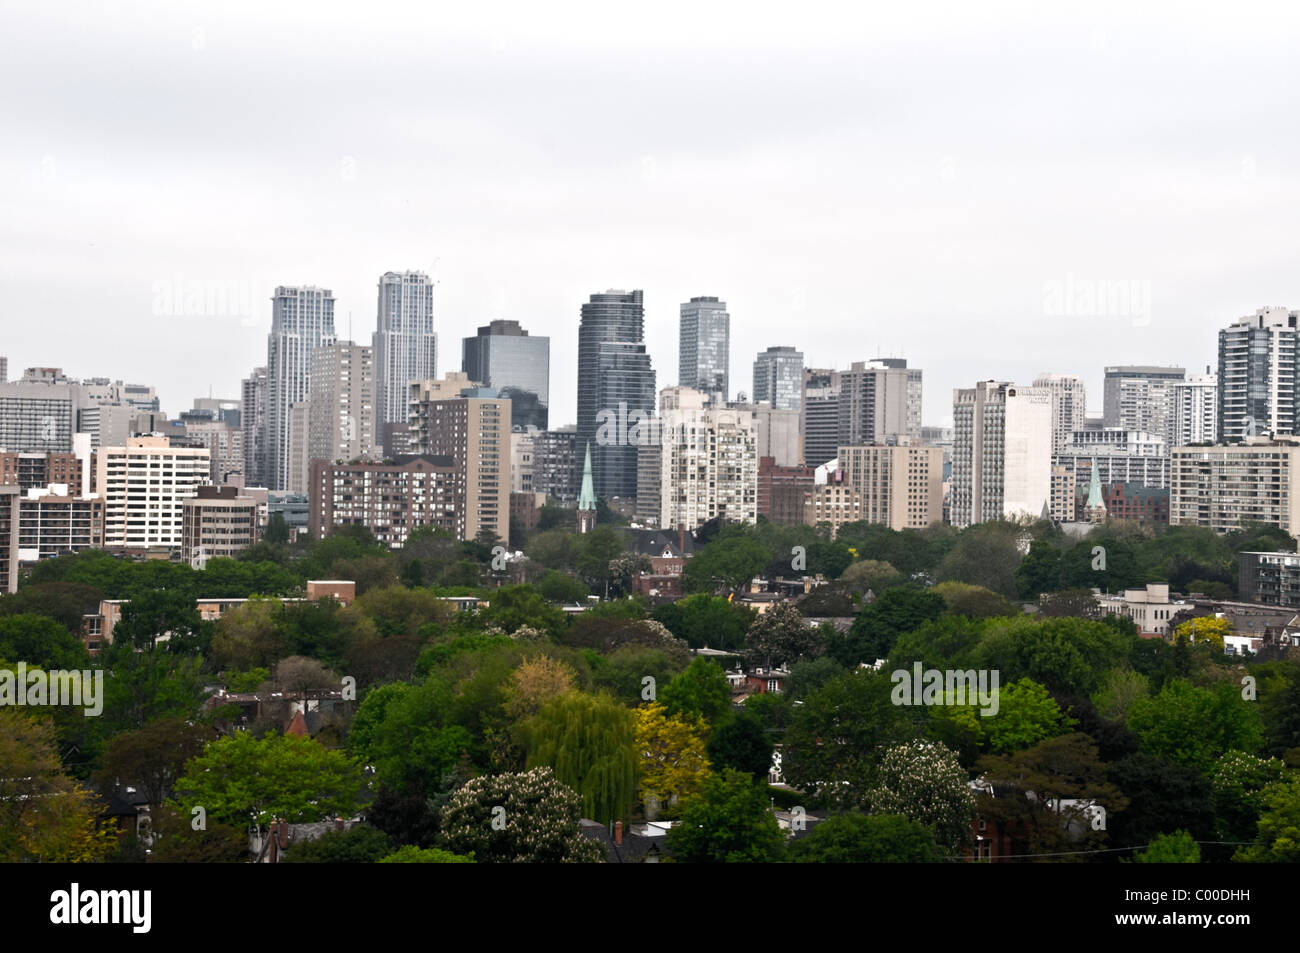 Downtown office and condo buildings along Yonge Street, and the residential neighbourhood of Cabbagetown in the foreground, Toronto, Ontario, Canada. Stock Photo